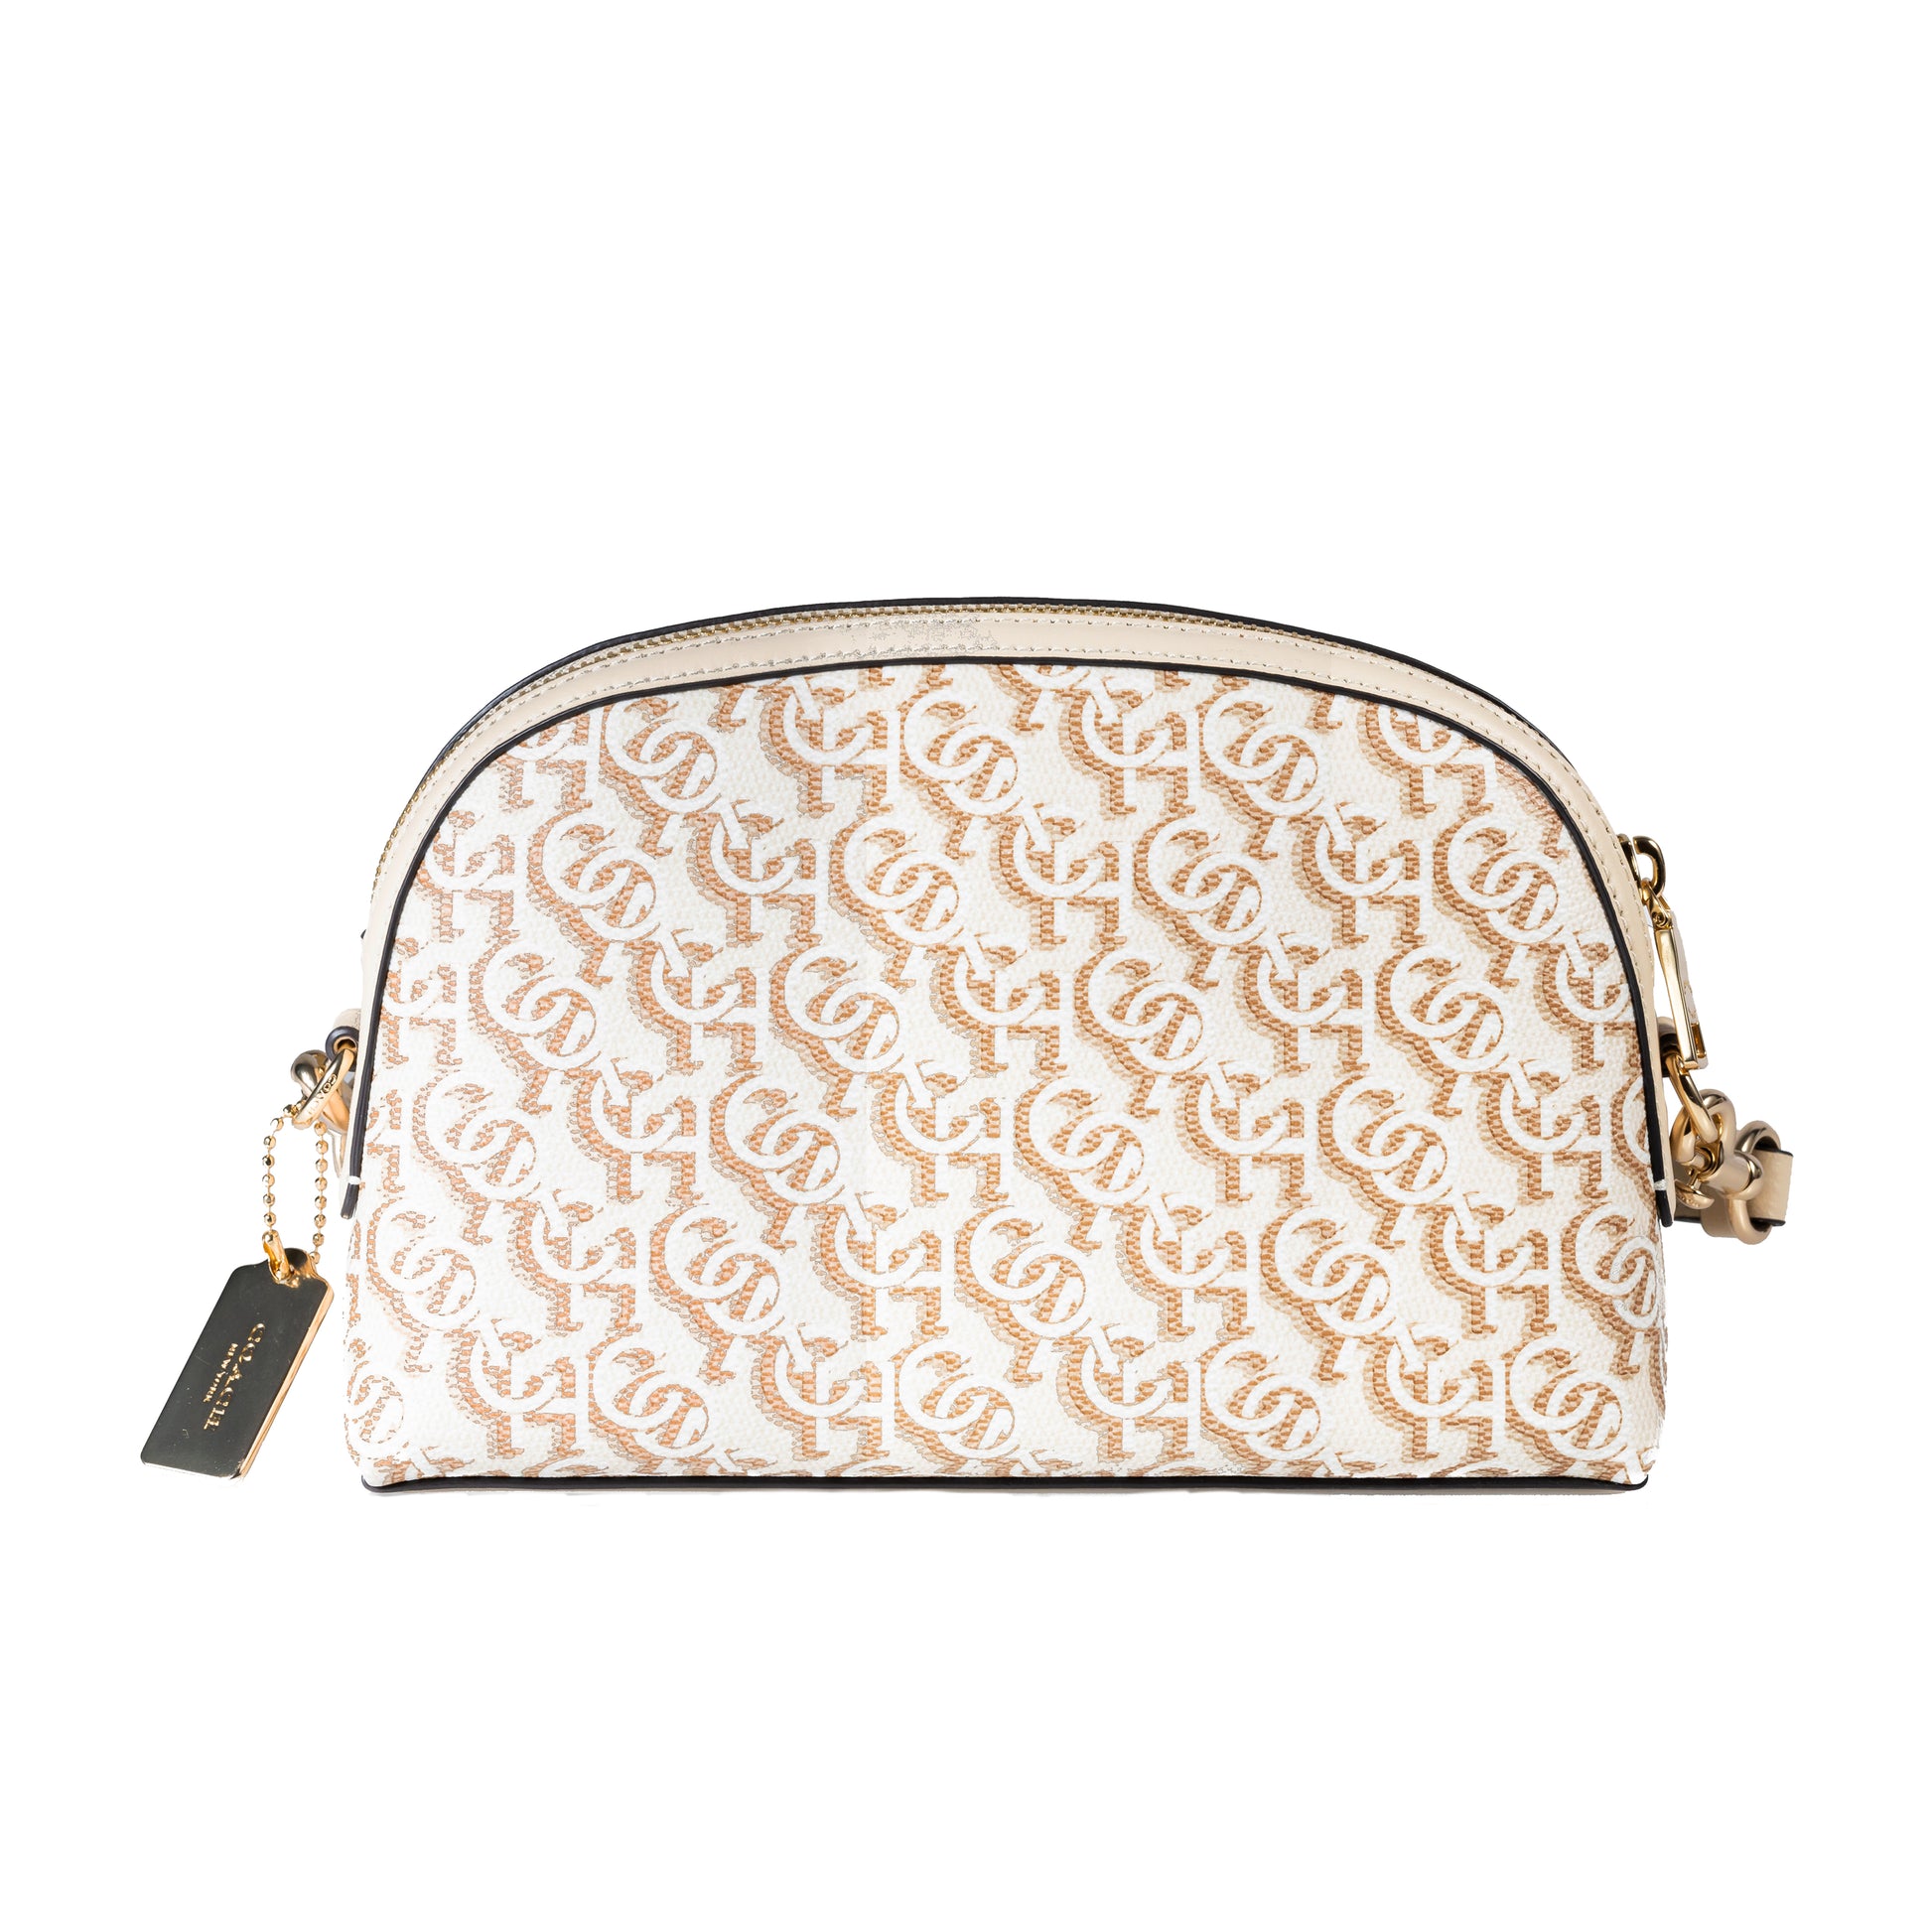 Madi Crossbody With Coach Monogram Print Printed Coated Canvas and Smooth Leather Construction Inside Multifunction Pocket Zip Closure, Fabric Lining Detachable Strap with a 55.90 cm Drop